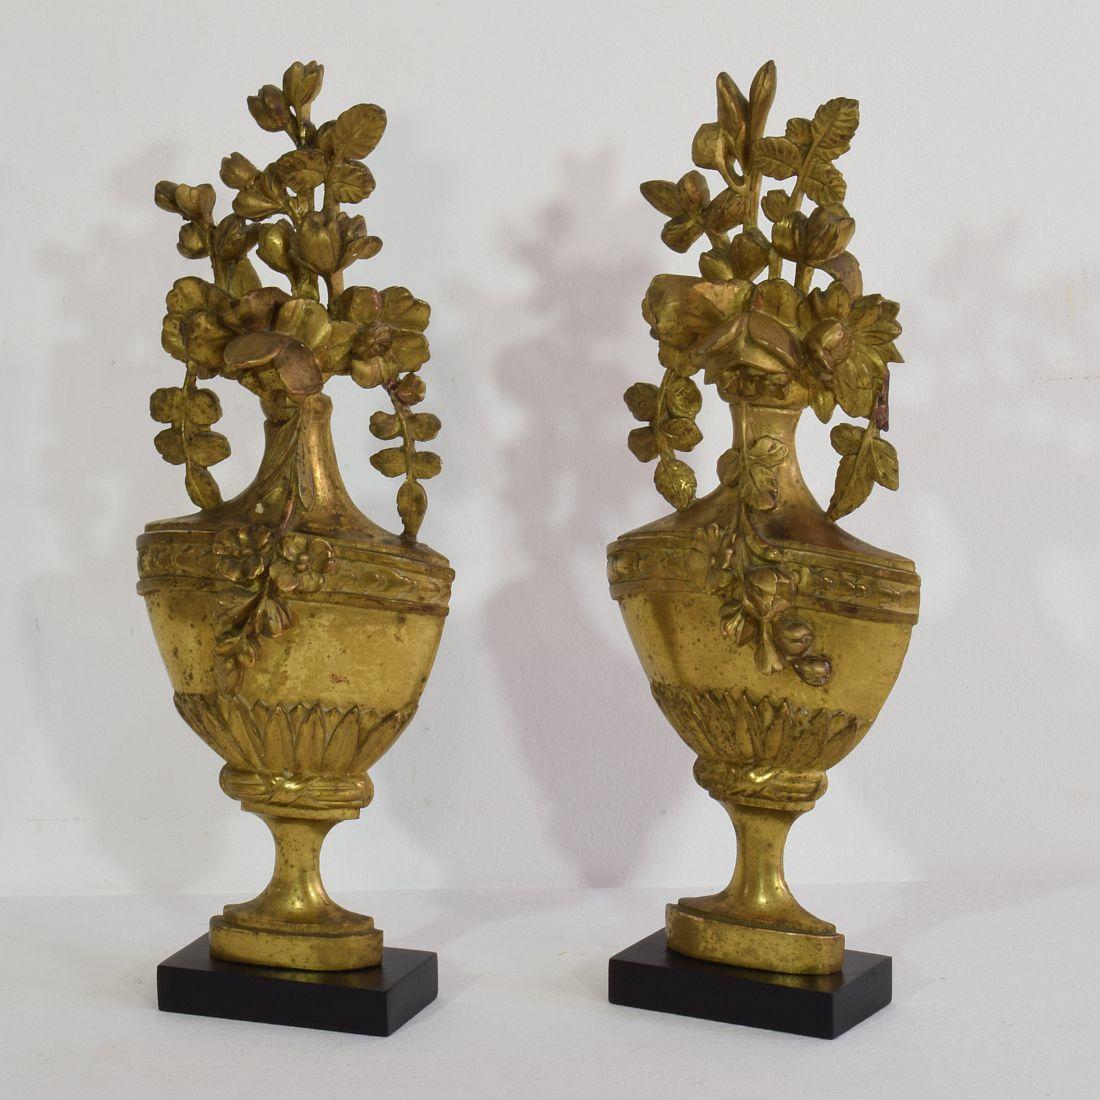 Nice couple of two giltwood neoclassical vase ornaments,
France, circa 1780-1850. Weathered, small losses and old repairs. Measurement here below includes the wooden base.